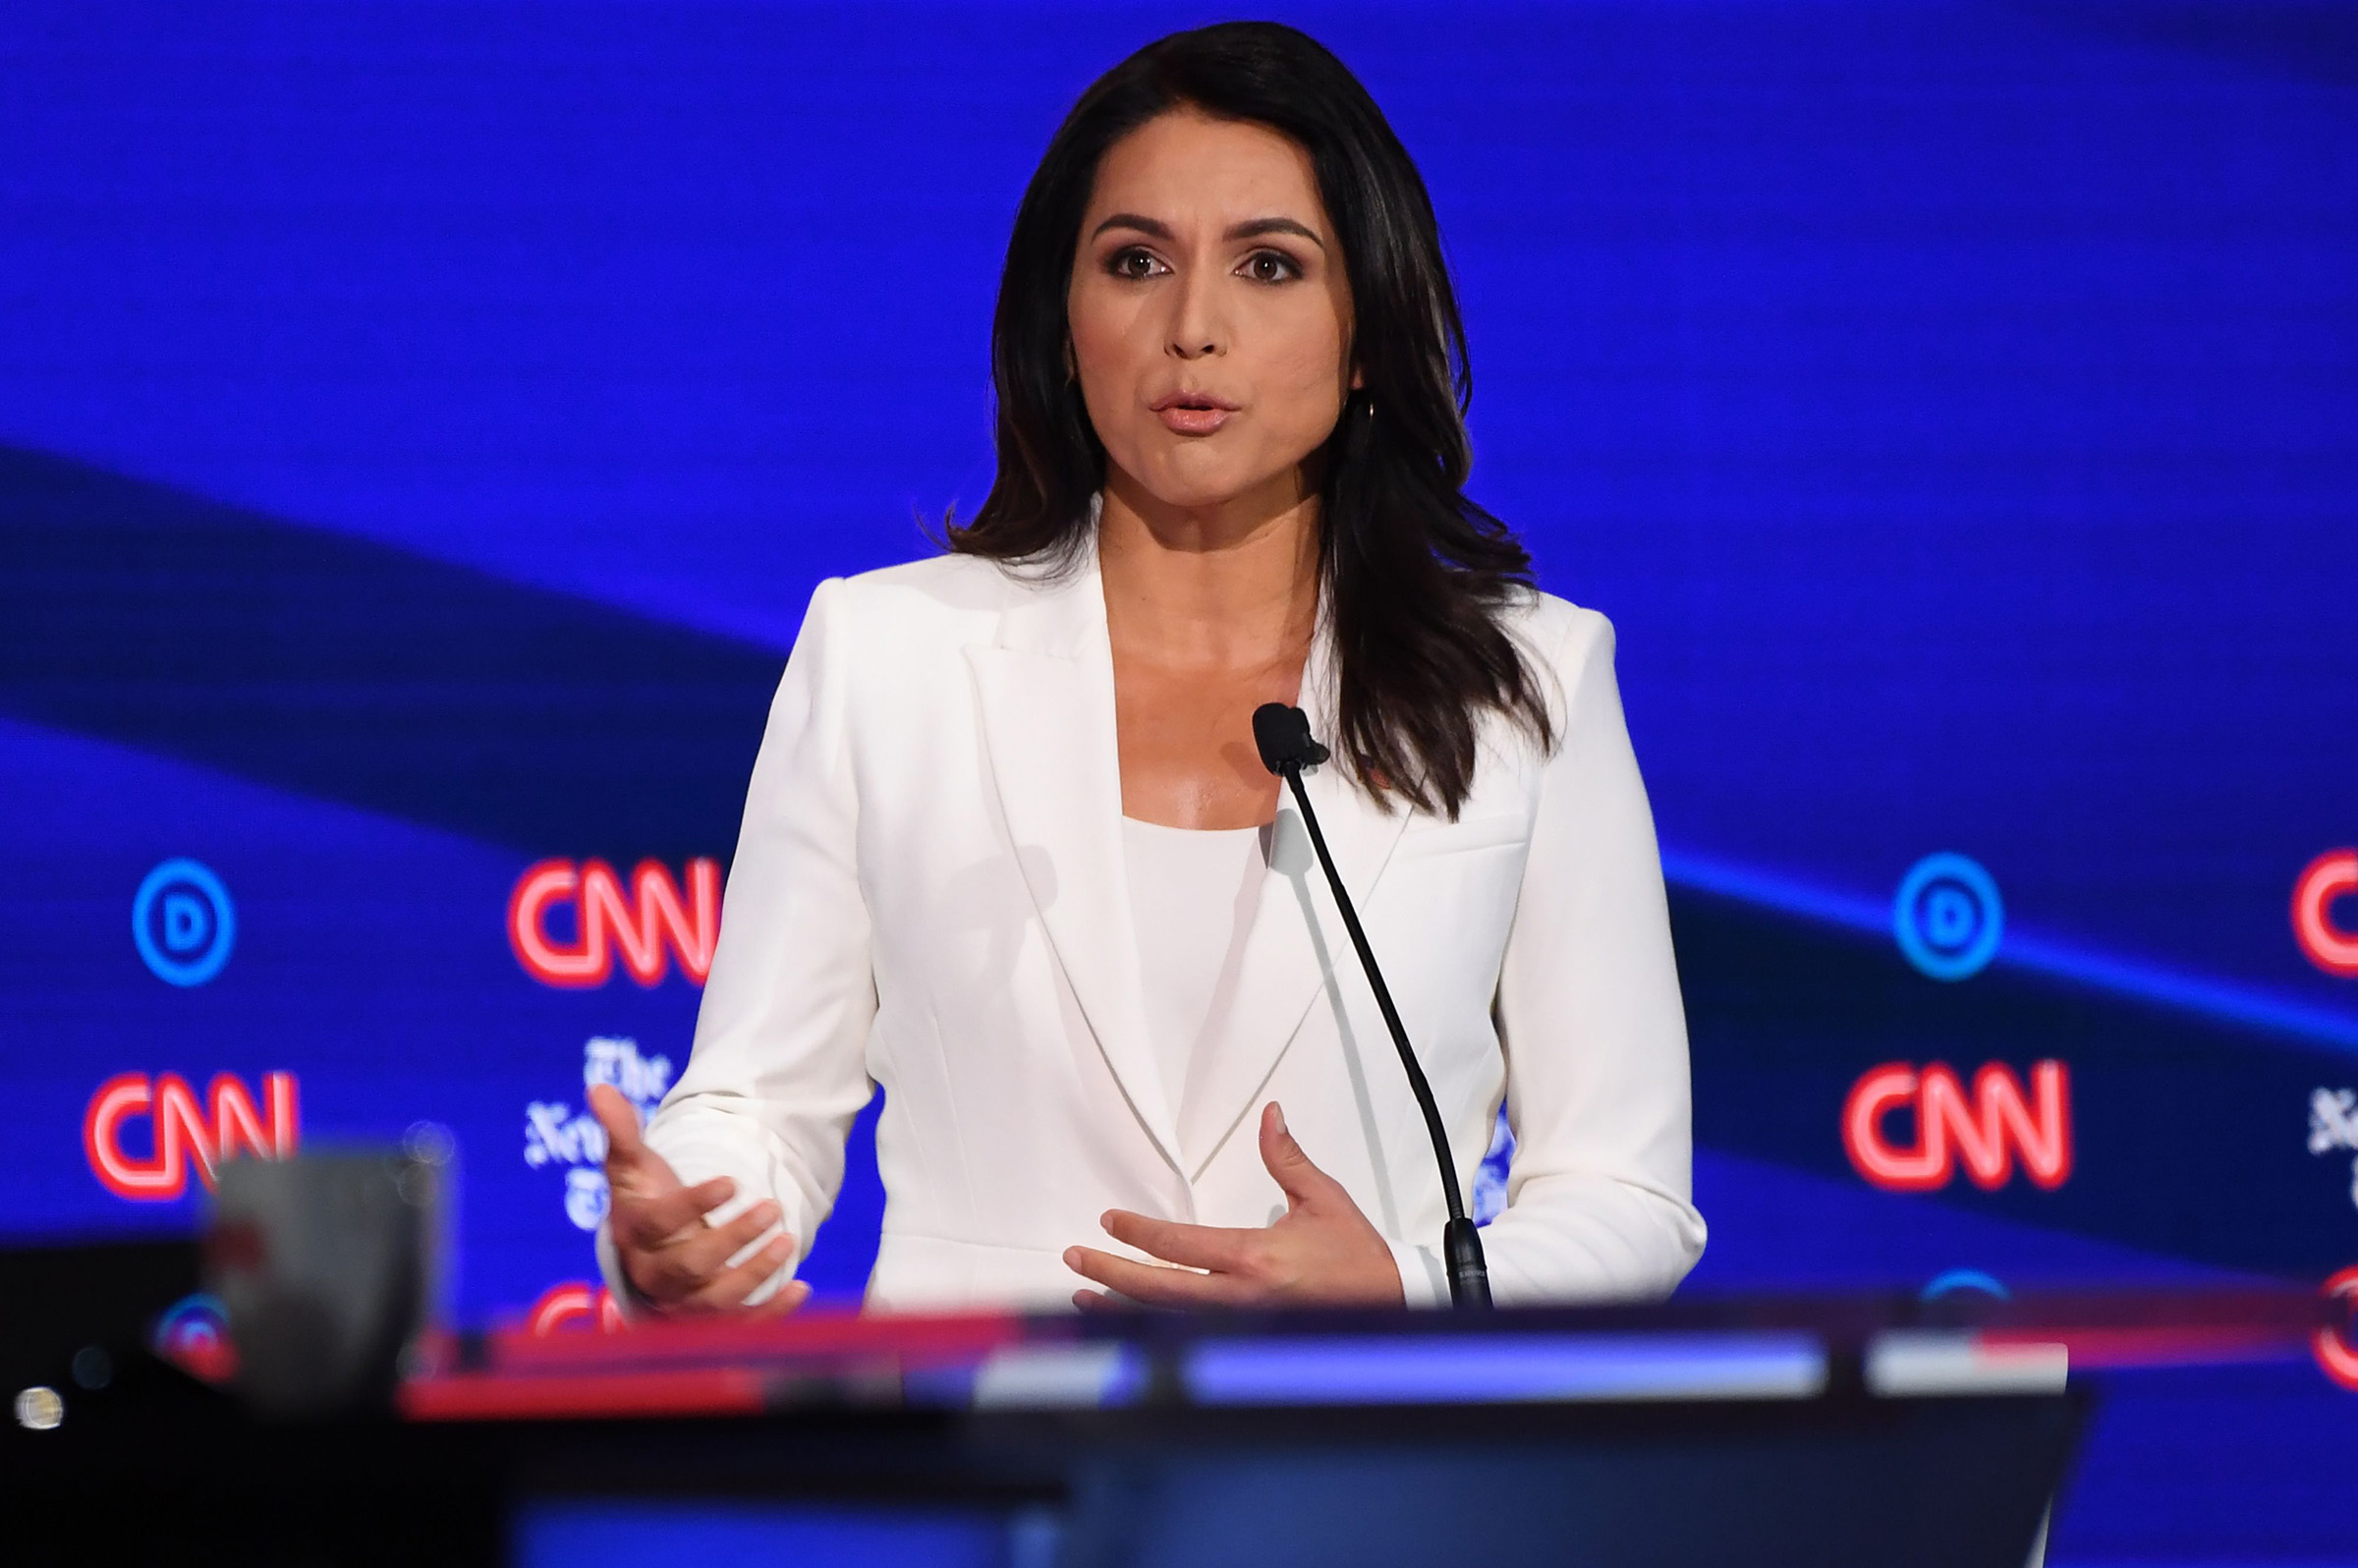 Representative for Hawaii Tulsi Gabbard speaks onstage during the fourth Democratic primary debate of the 2020 presidential campaign season in Westerville, Ohio on October 15, 2019. (Saul Loeb—AFP via Getty Images)